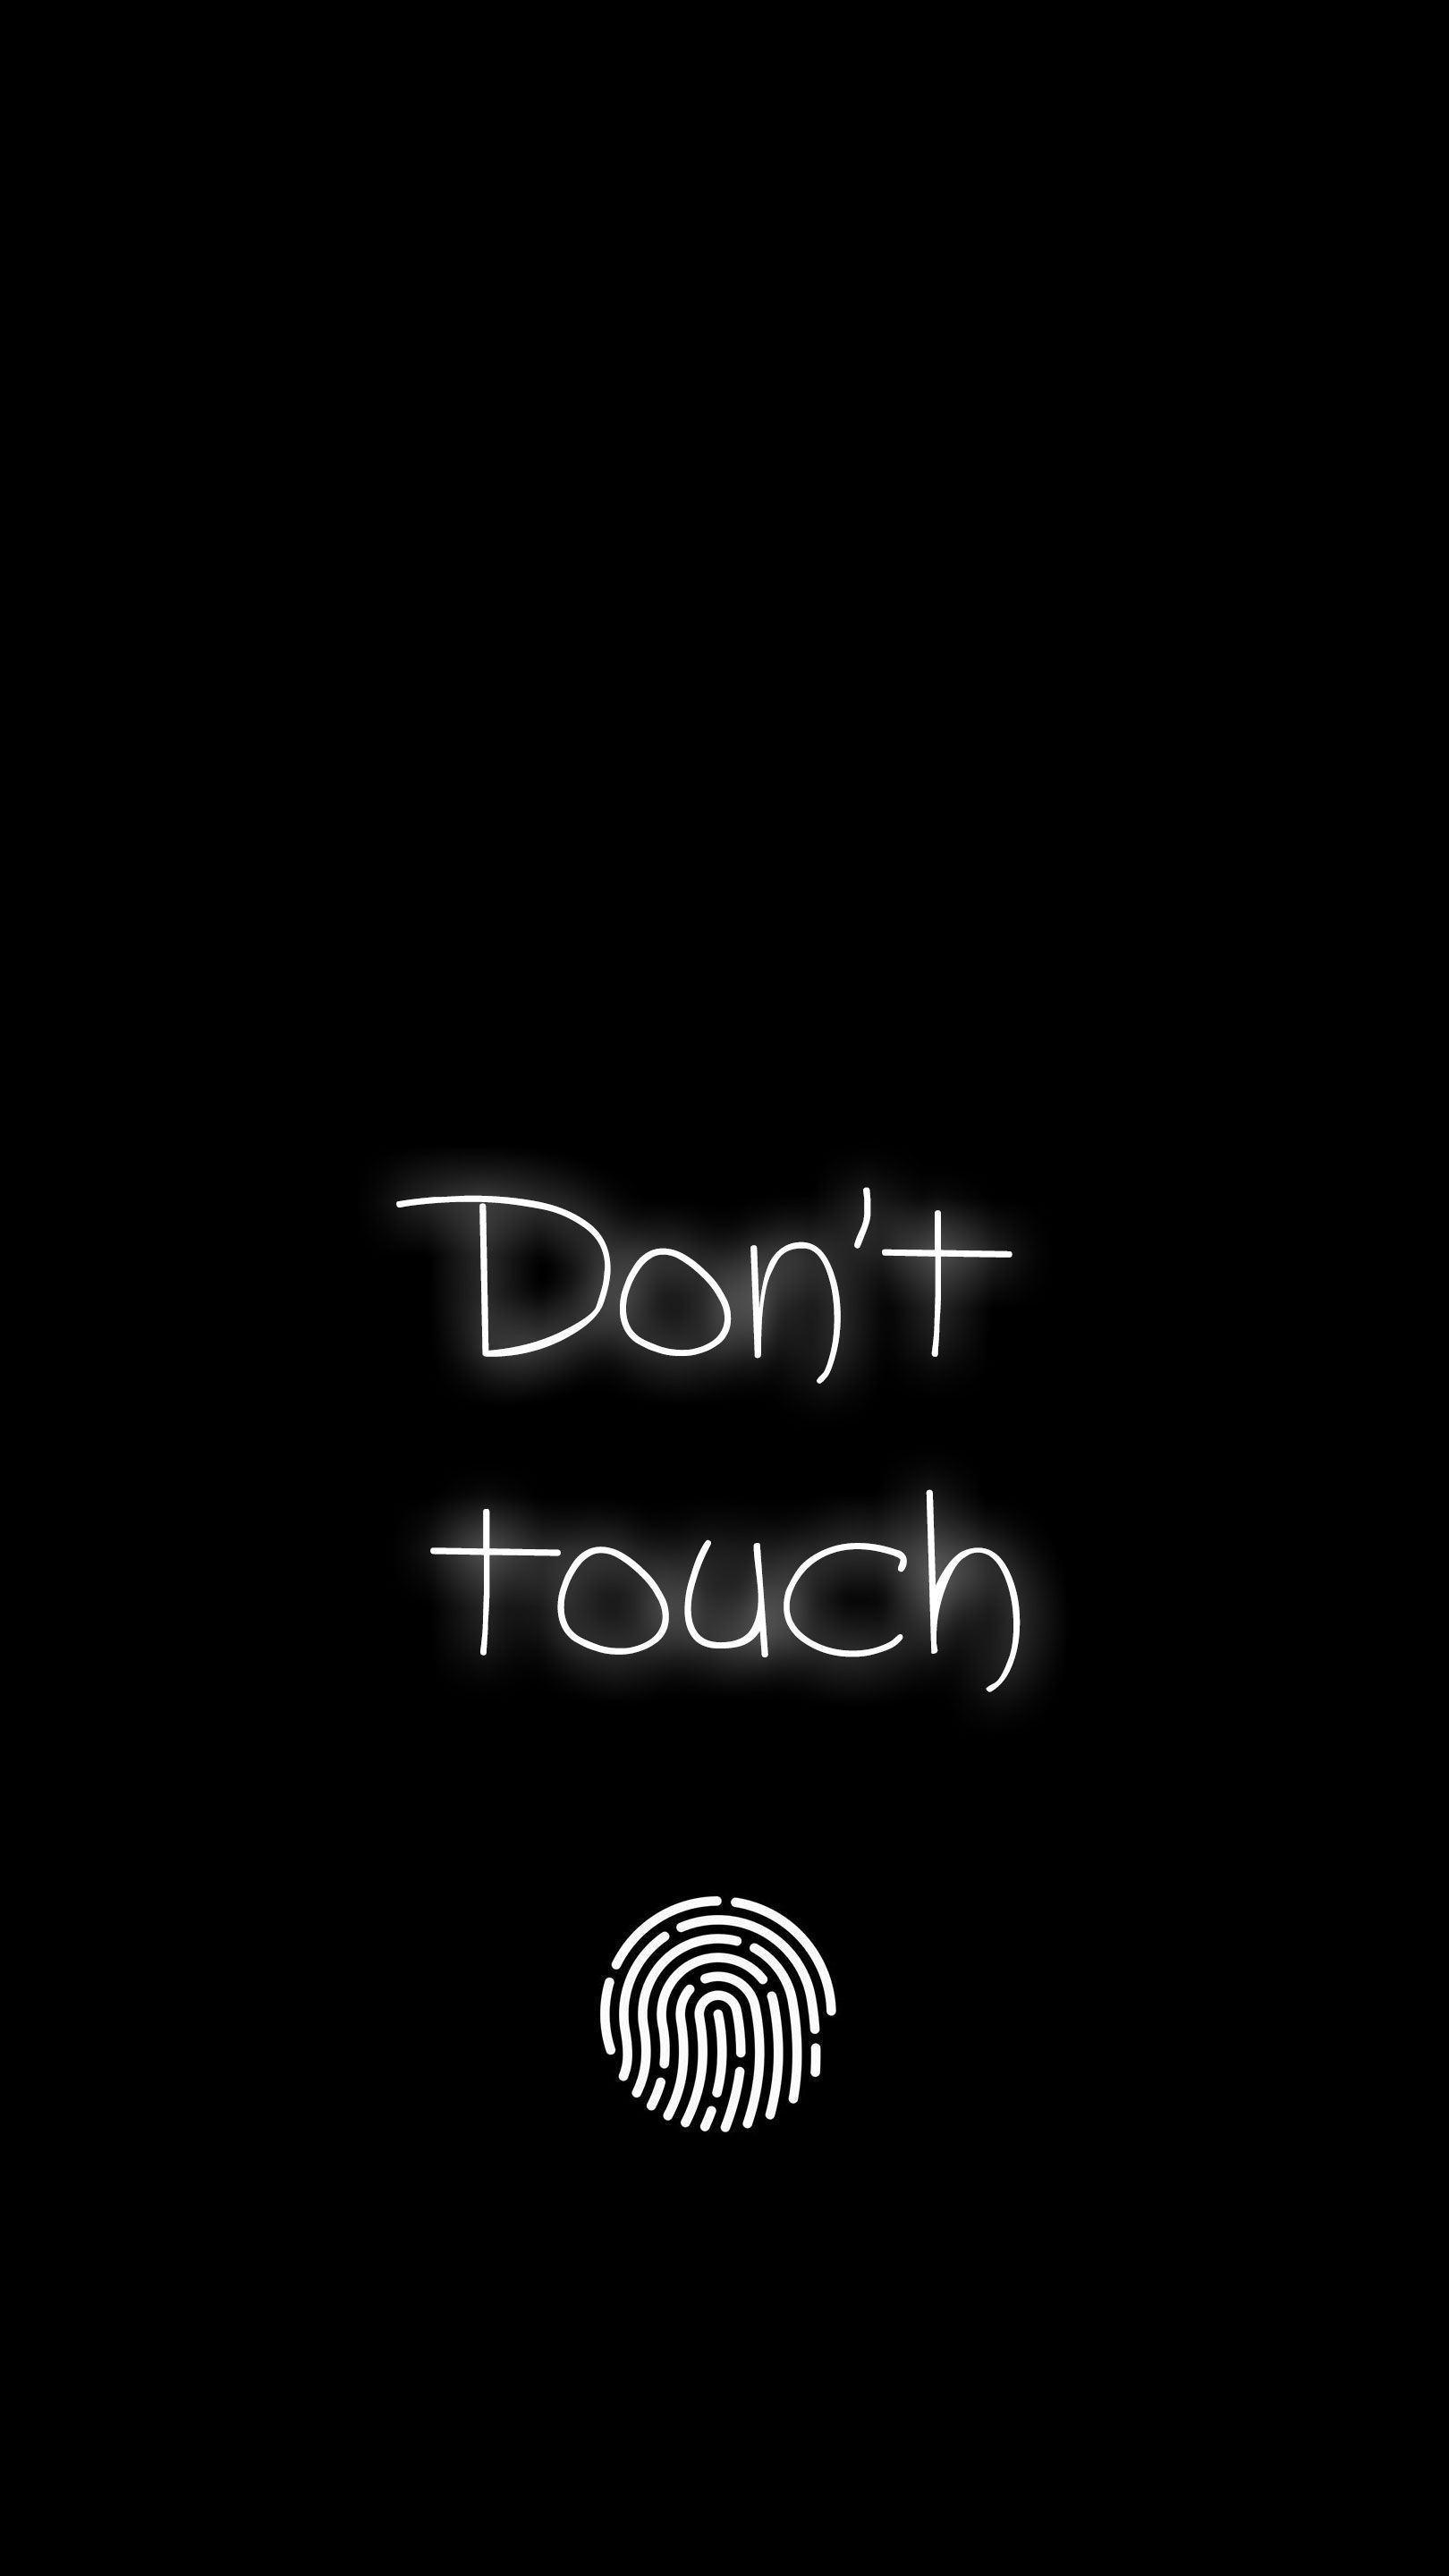 Dont Touch iPhone Wallpaper. Funny phone wallpaper, Funny iphone wallpaper, Dont touch my phone wallpaper